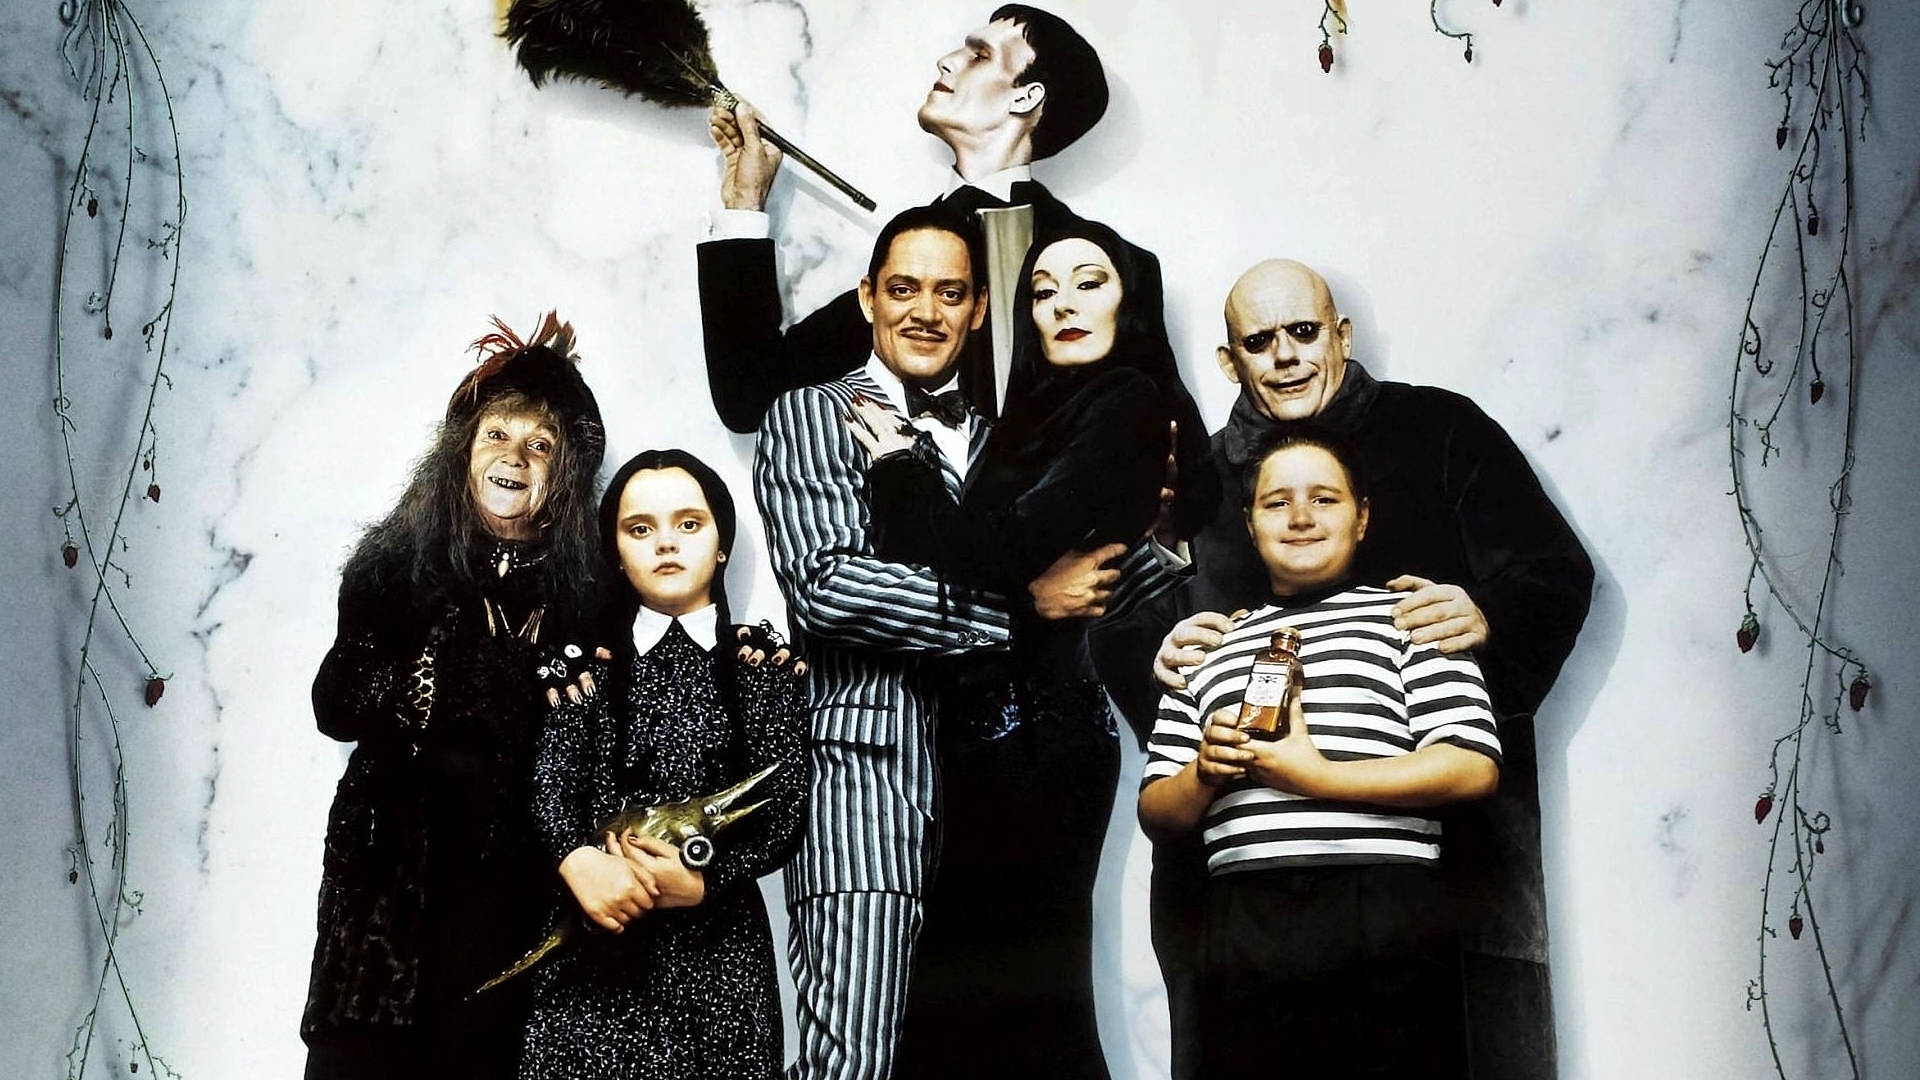 The Addams Family Portrait Background